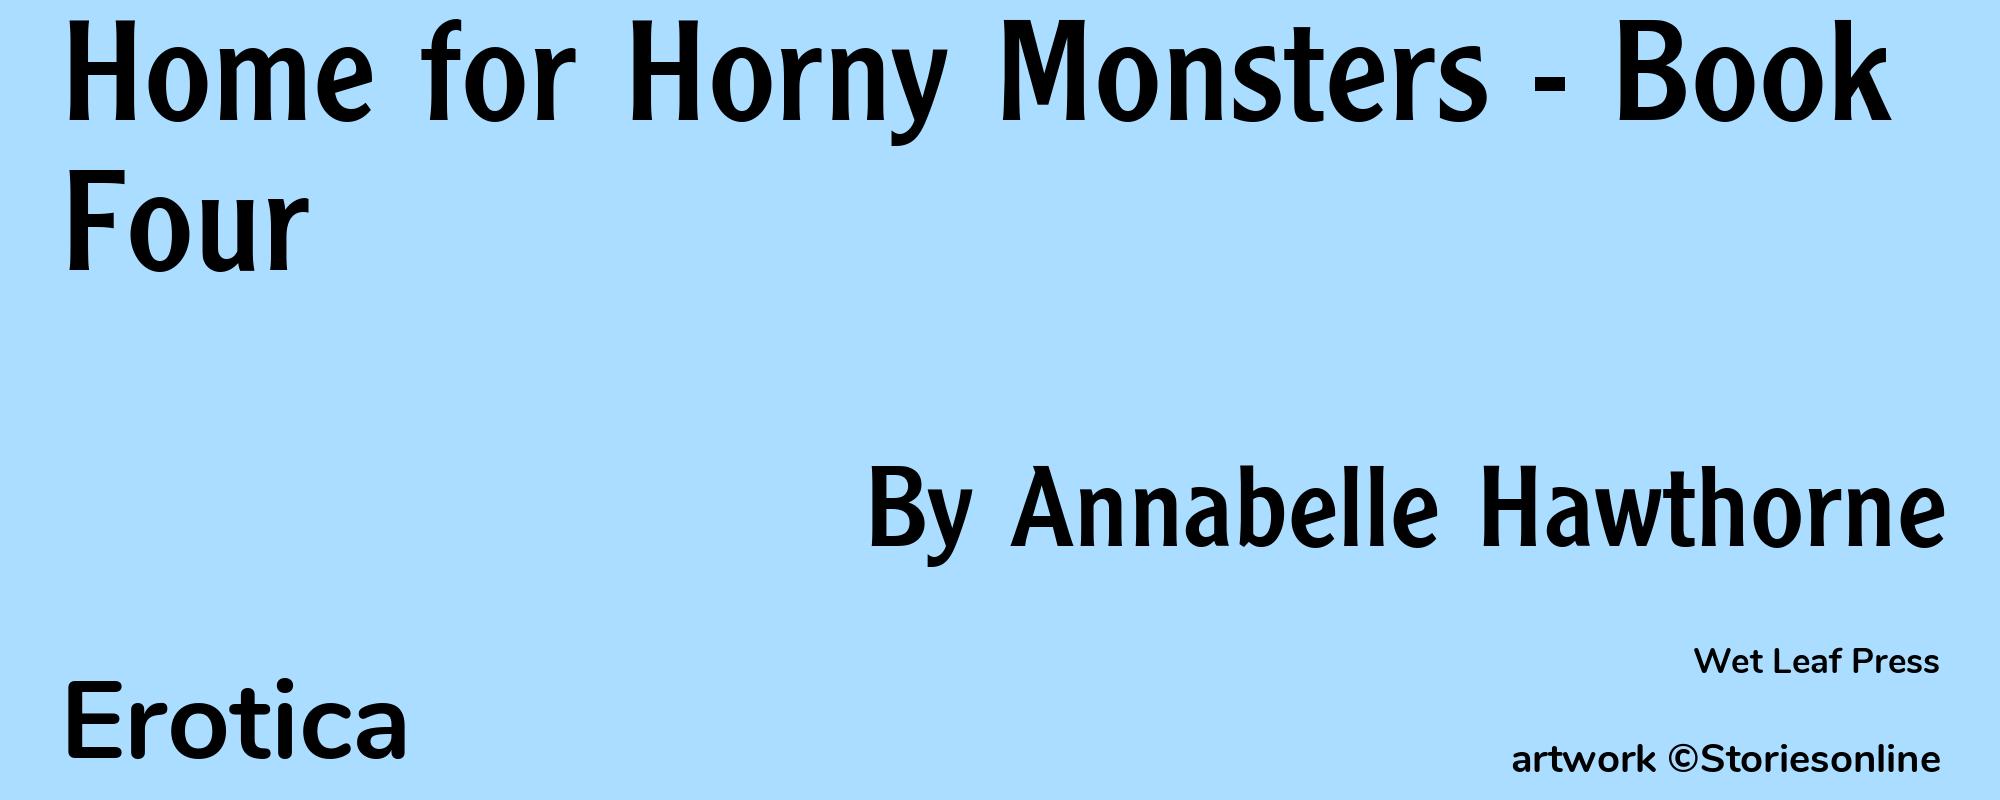 Home for Horny Monsters - Book Four - Cover